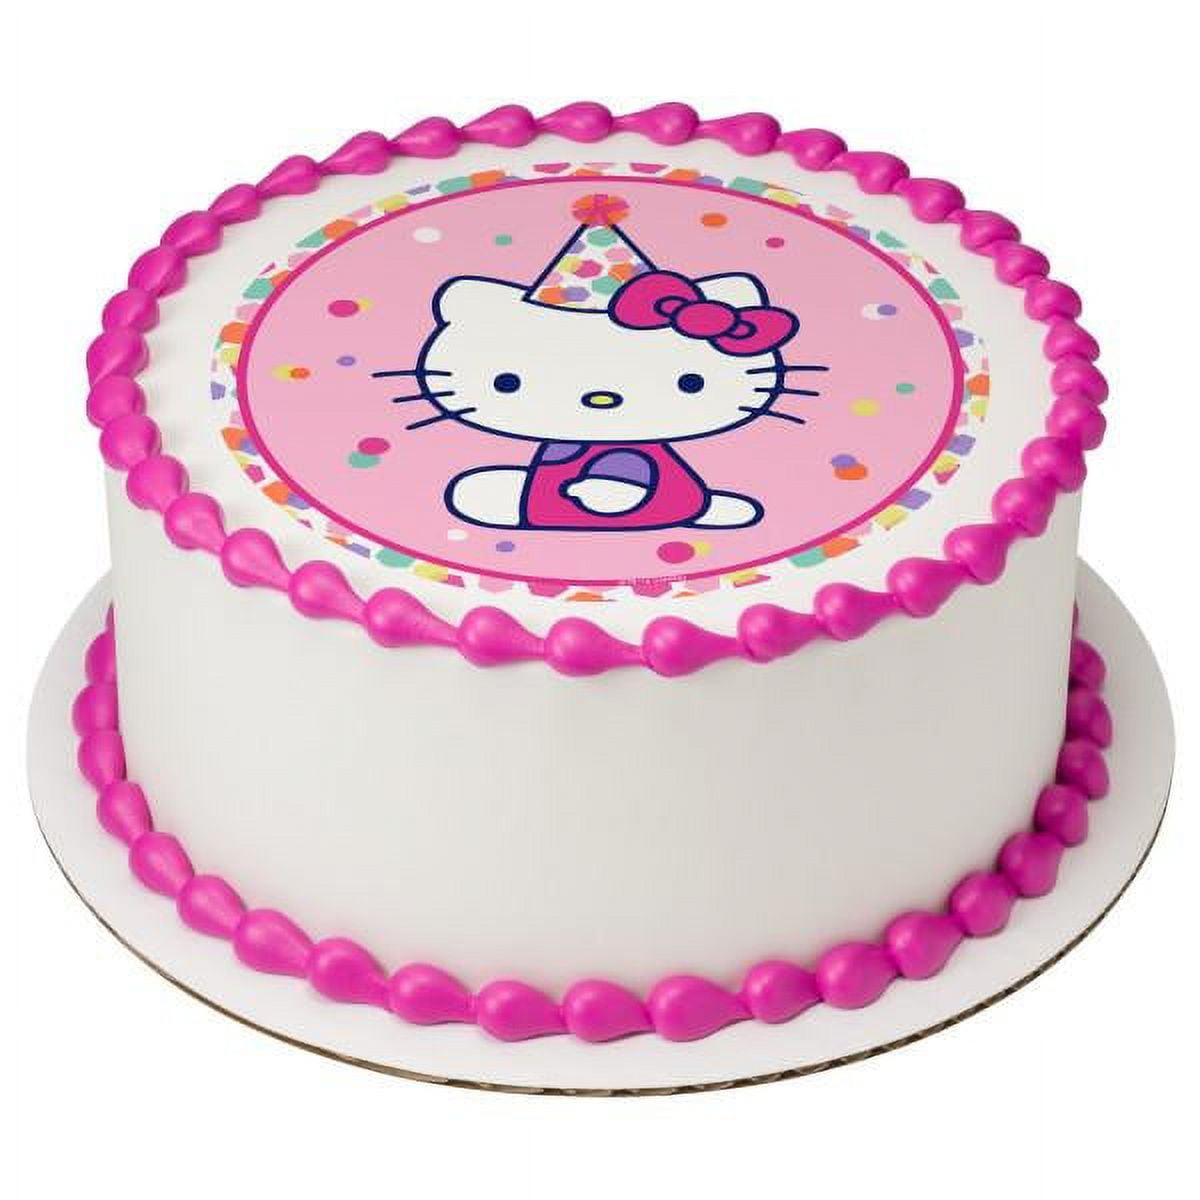 Hello Kitty Cake - order online theme cake in coimbatore - Friend In knead